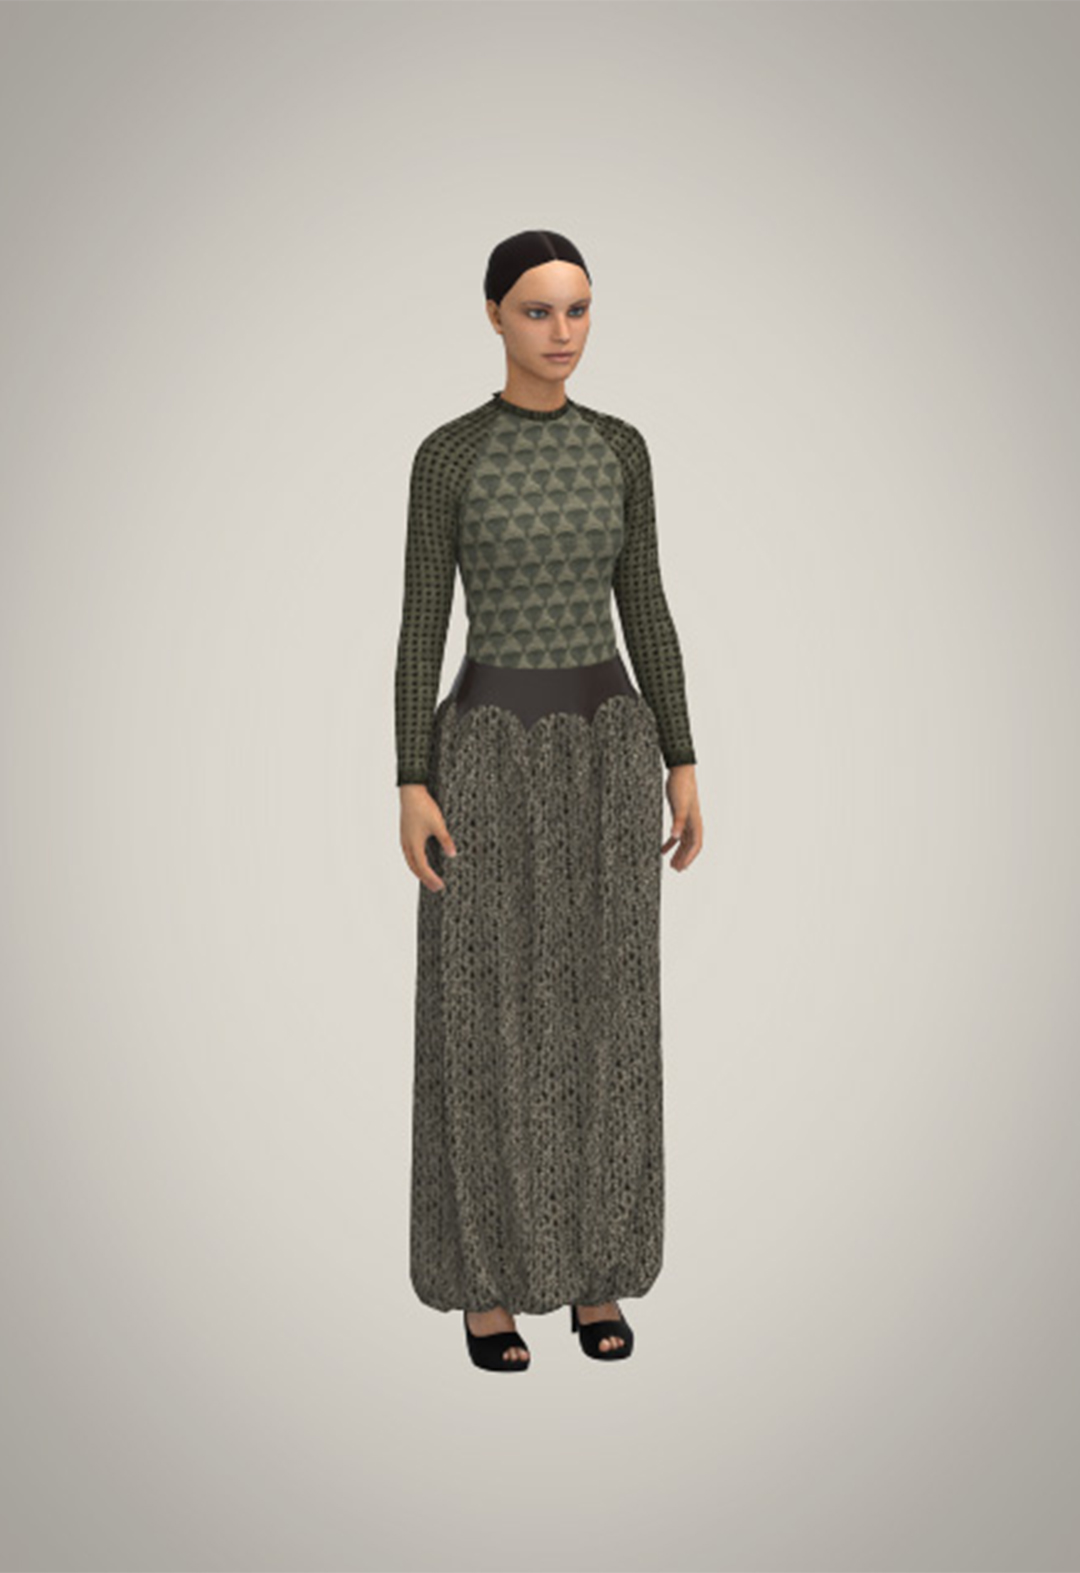 3D-simulated model wearing Islamic architecture–inspired knit structures, with domed leather yoke skirt